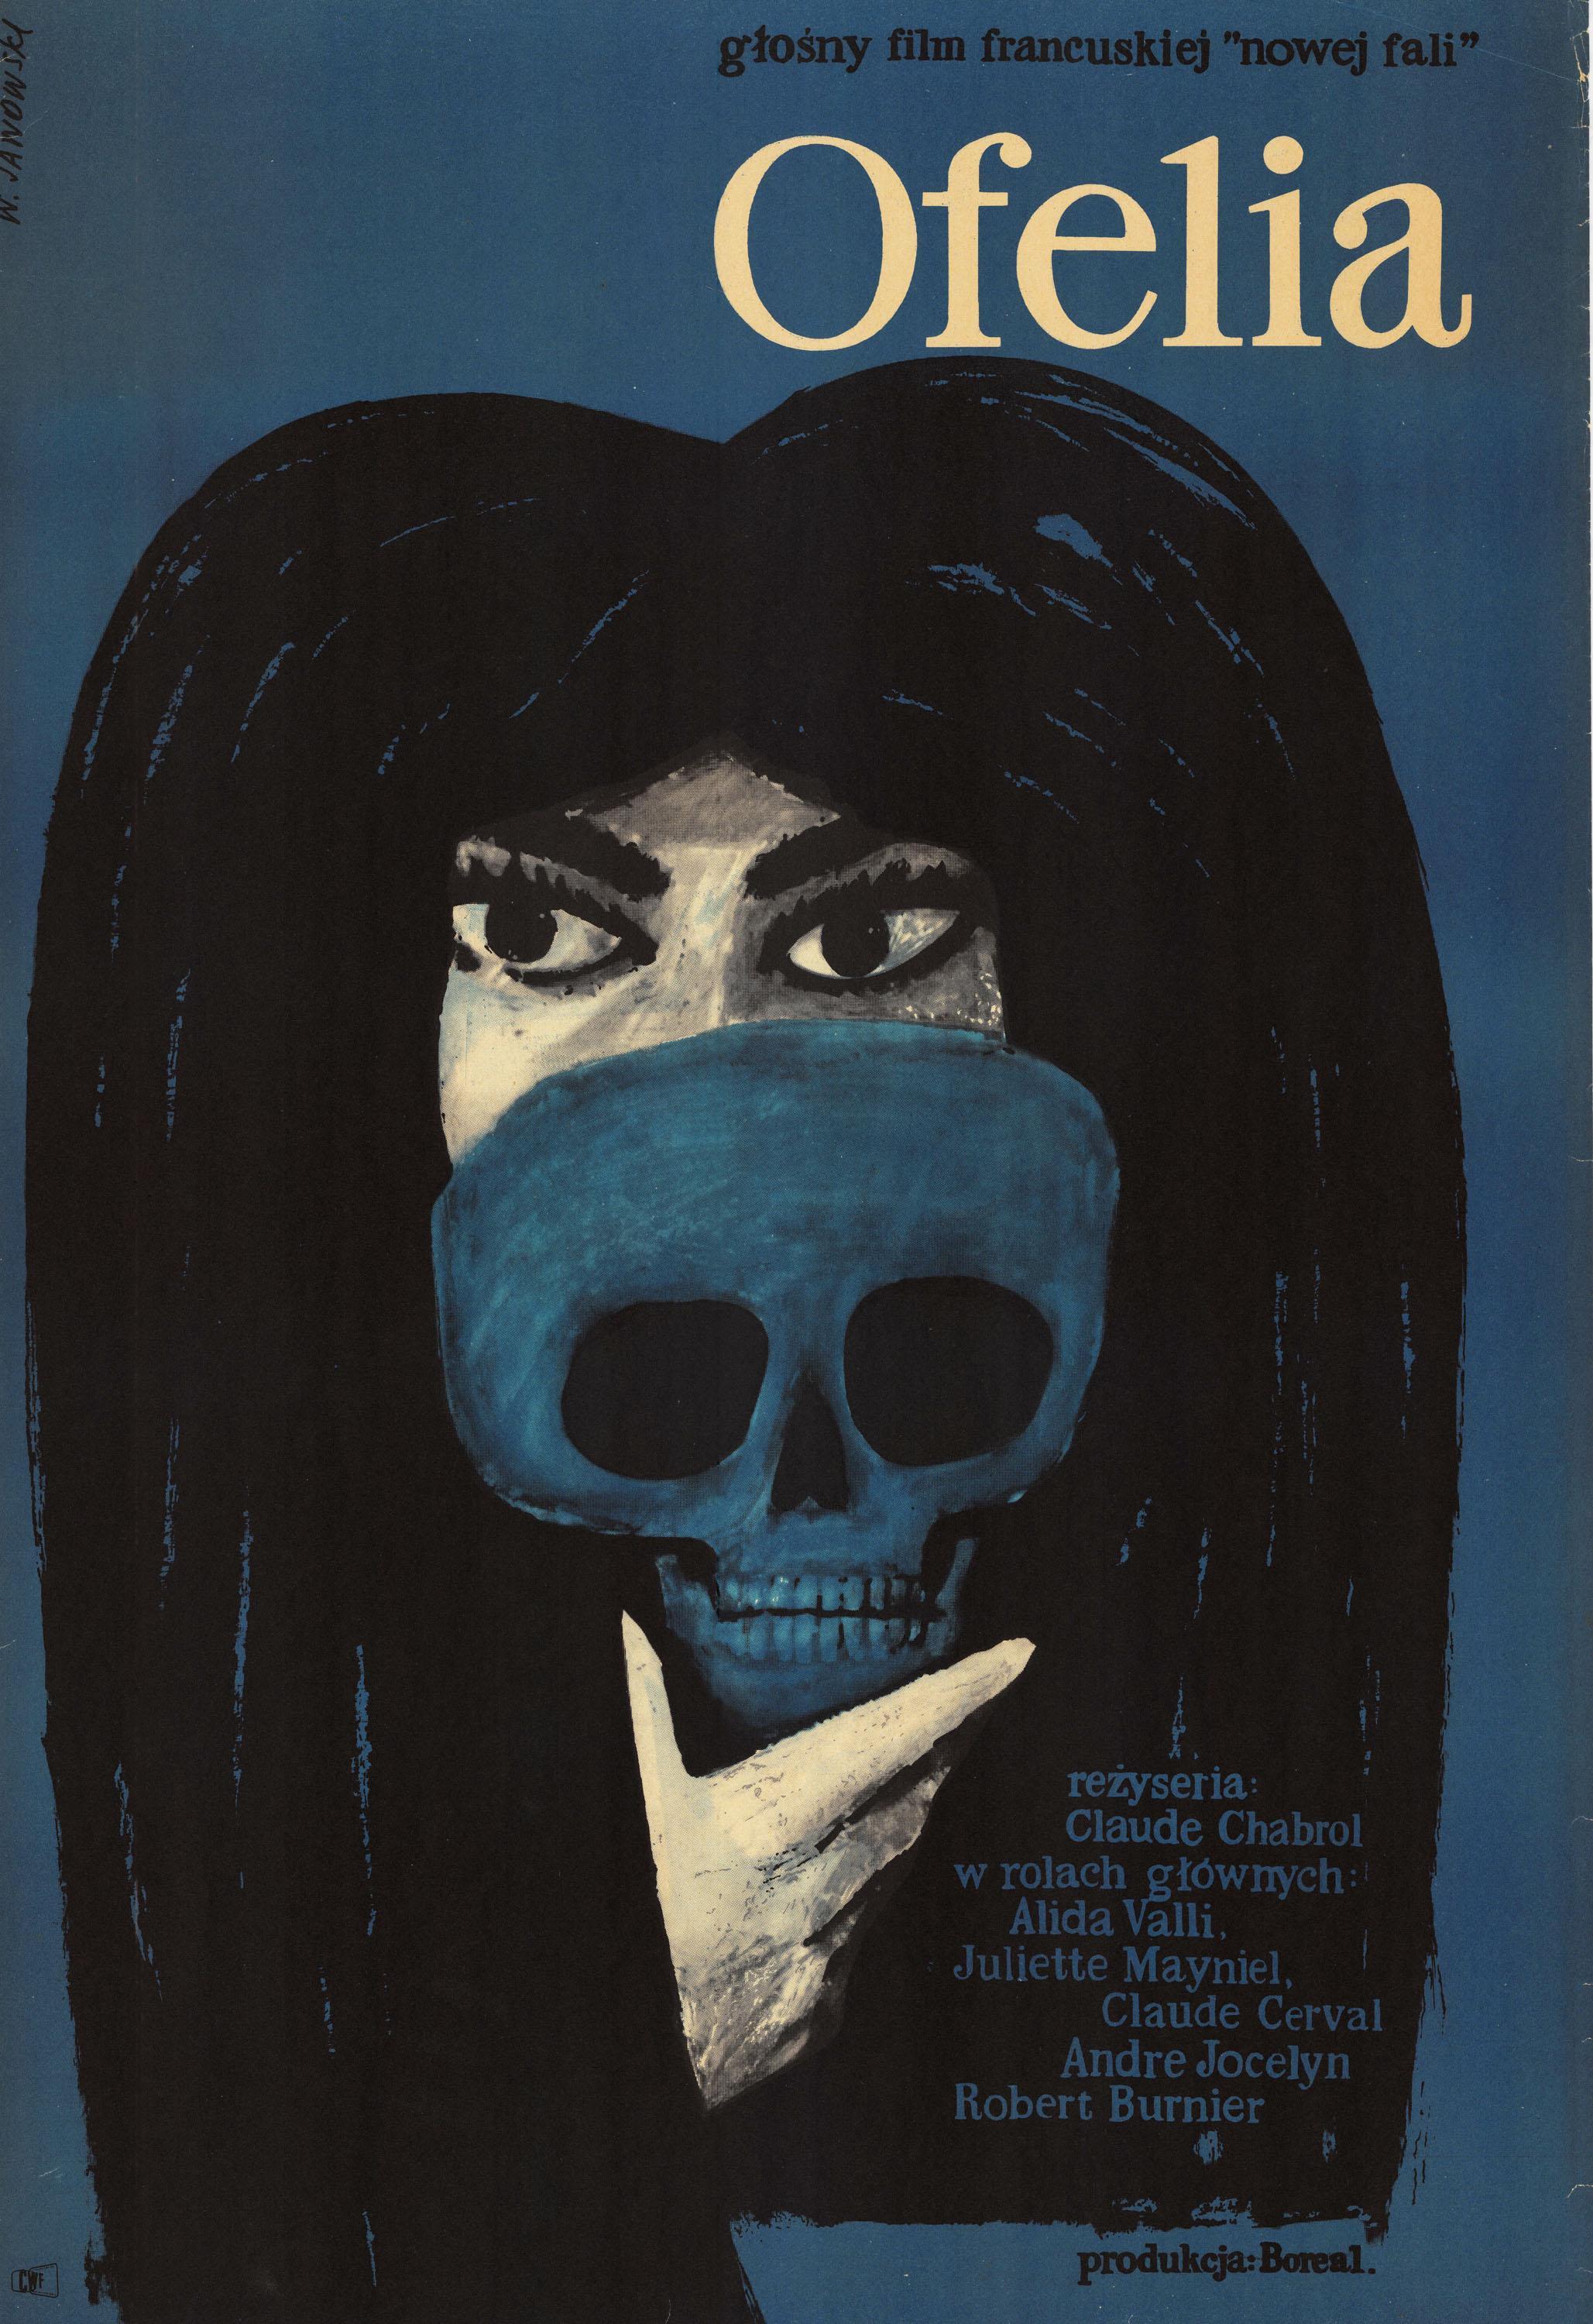 Ofelia original polish movie poster by Witold Janowski, 1964.
French movie directed by Claude Chabrol.